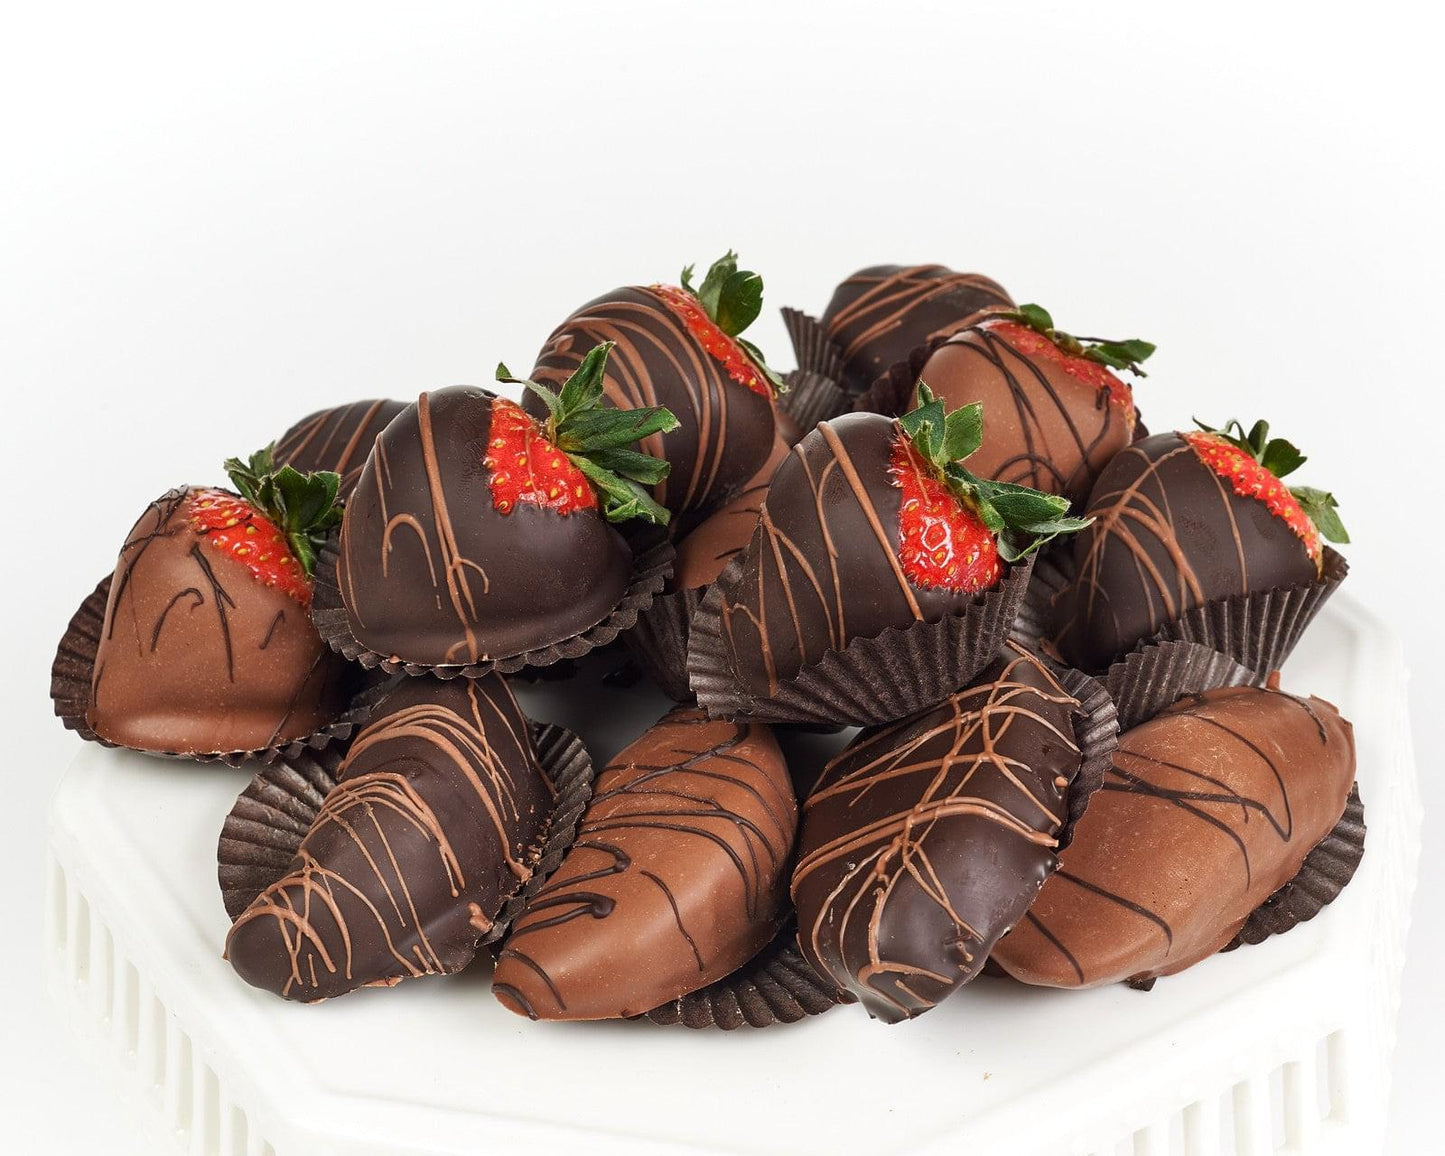 Chocolate Dipped & Drizzled Fresh Strawberries and Fruits, Pickup and Local Delivery Only